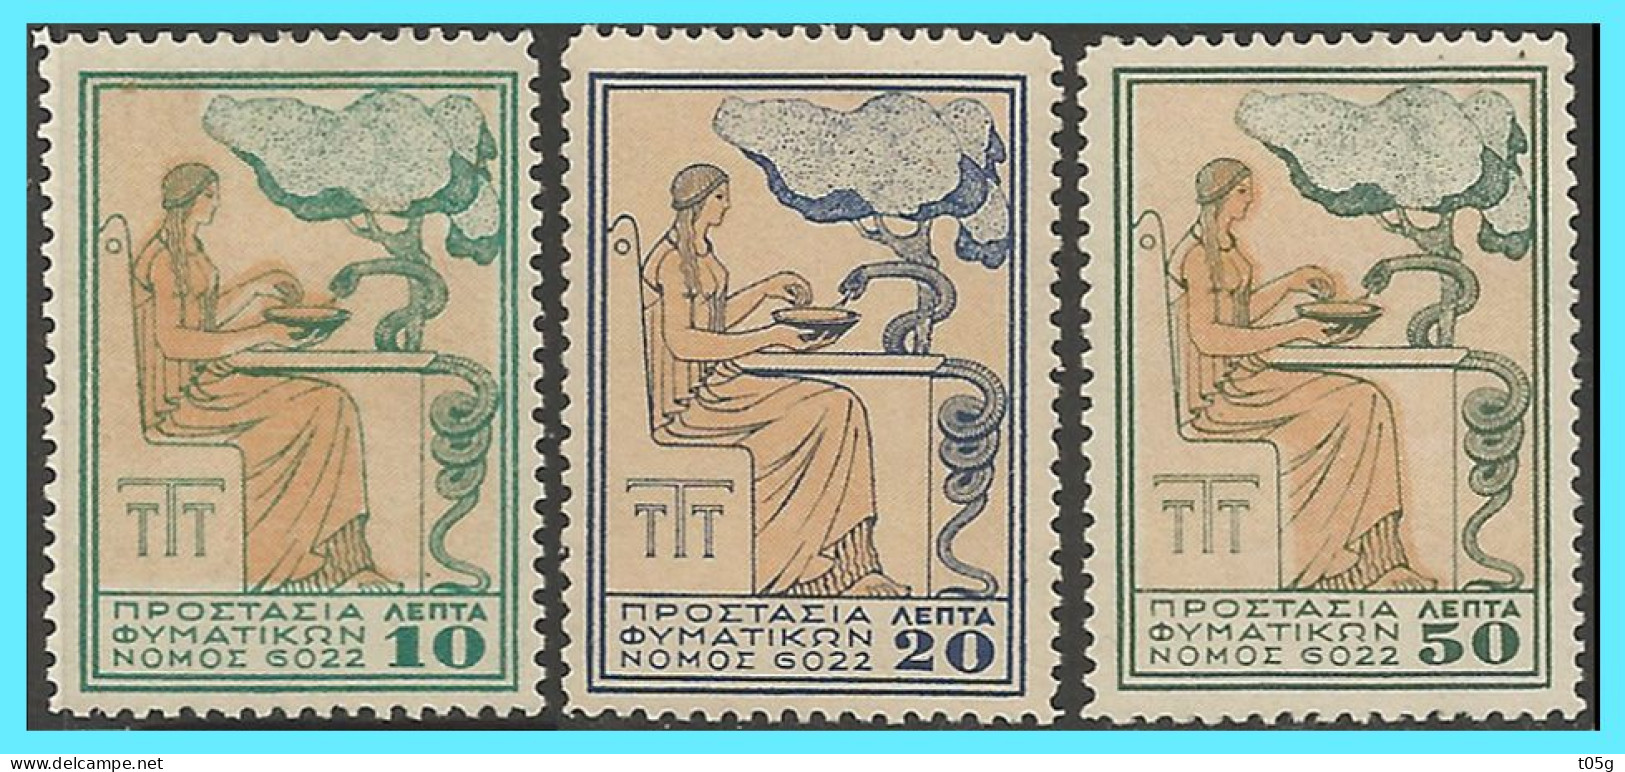 GREECE- GRECE - HELLAS CHARITY STAMPS 1934: "Protection For Tuberculosis Patients" Without " ELLAS Complet Set MNH** - Beneficenza